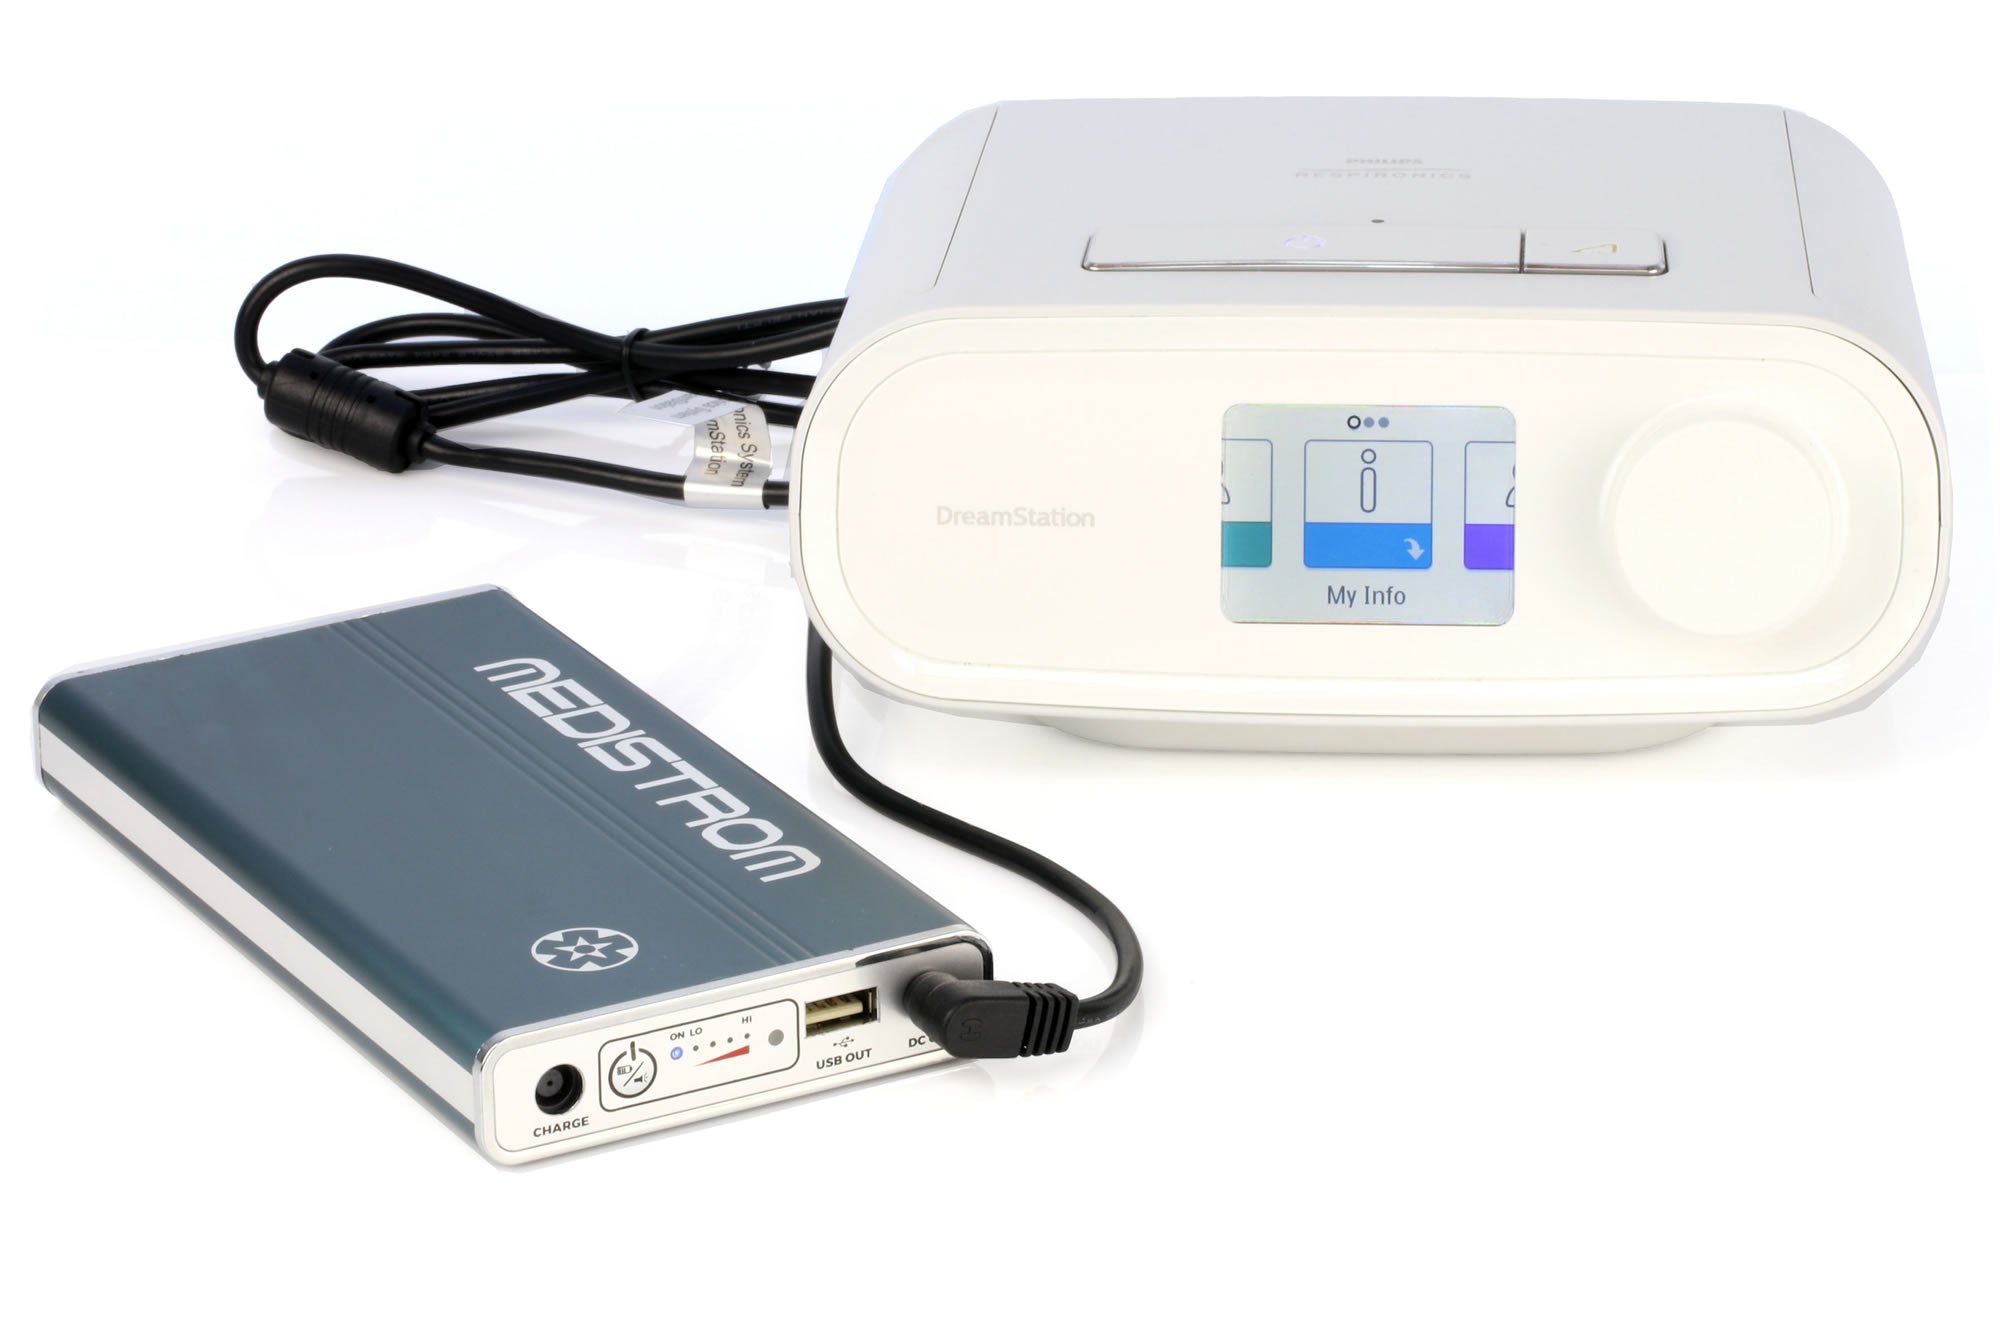 Pilot 12 connected to Philips Dreamstation CPAP machine